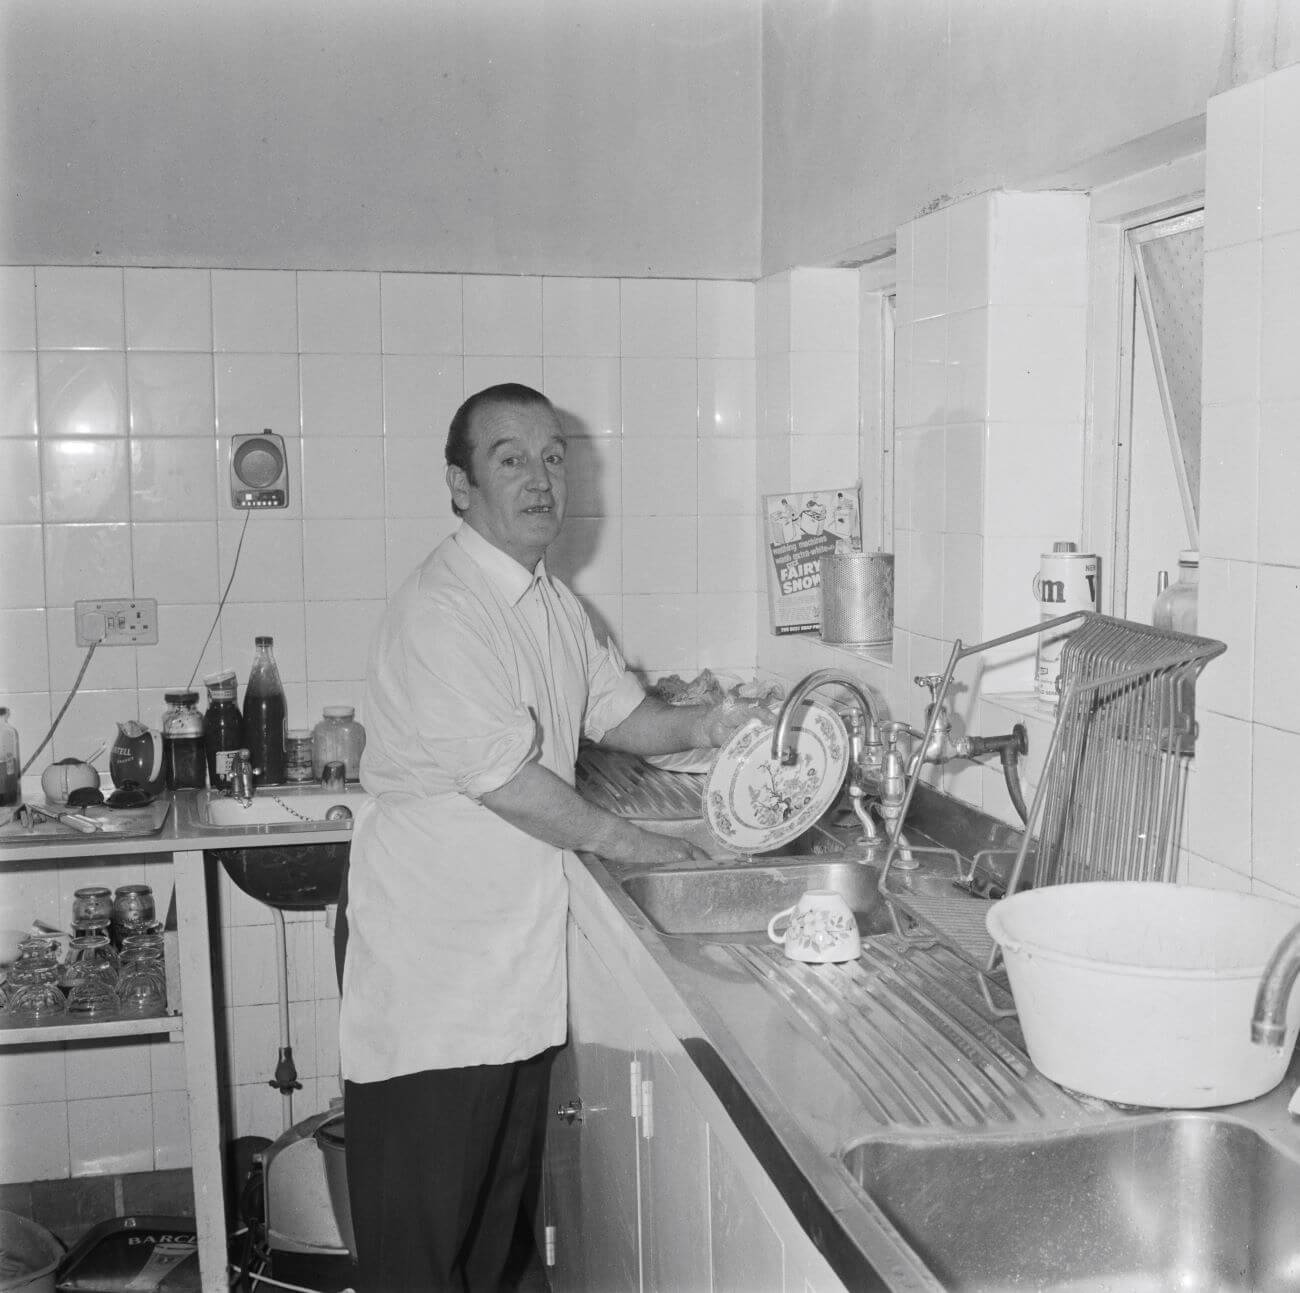 A black and white picture of John Lennon's father Alfred standing at a sink washing a plate.